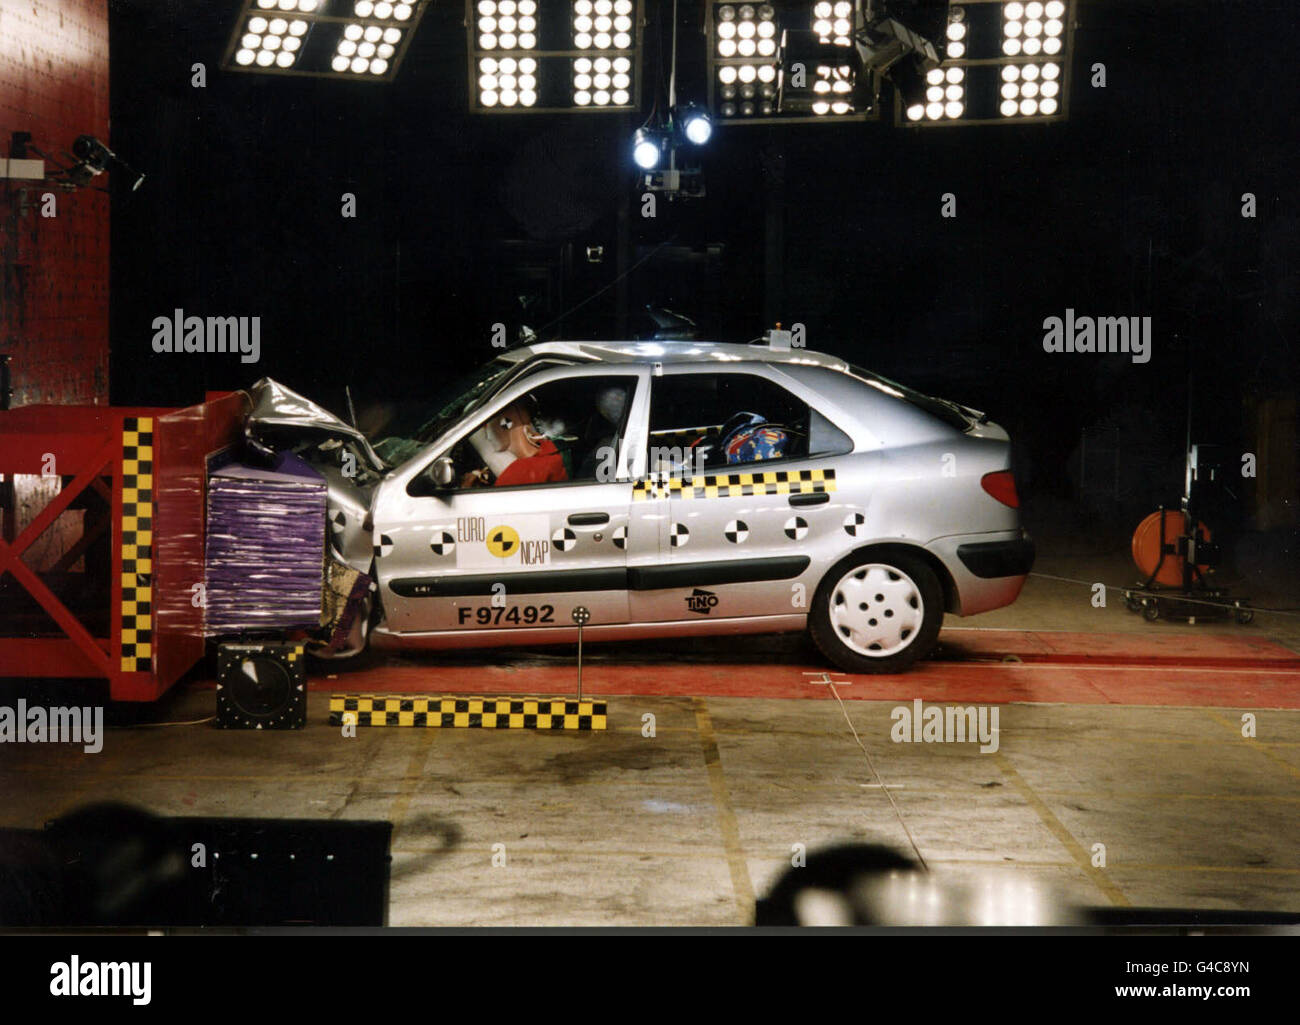 The Citroen Xsara, which received three stars in the latest European New Car Assessment (NCAP) crash test programme. PA Photos. See PA story TRANSPORT Crash Stock Photo